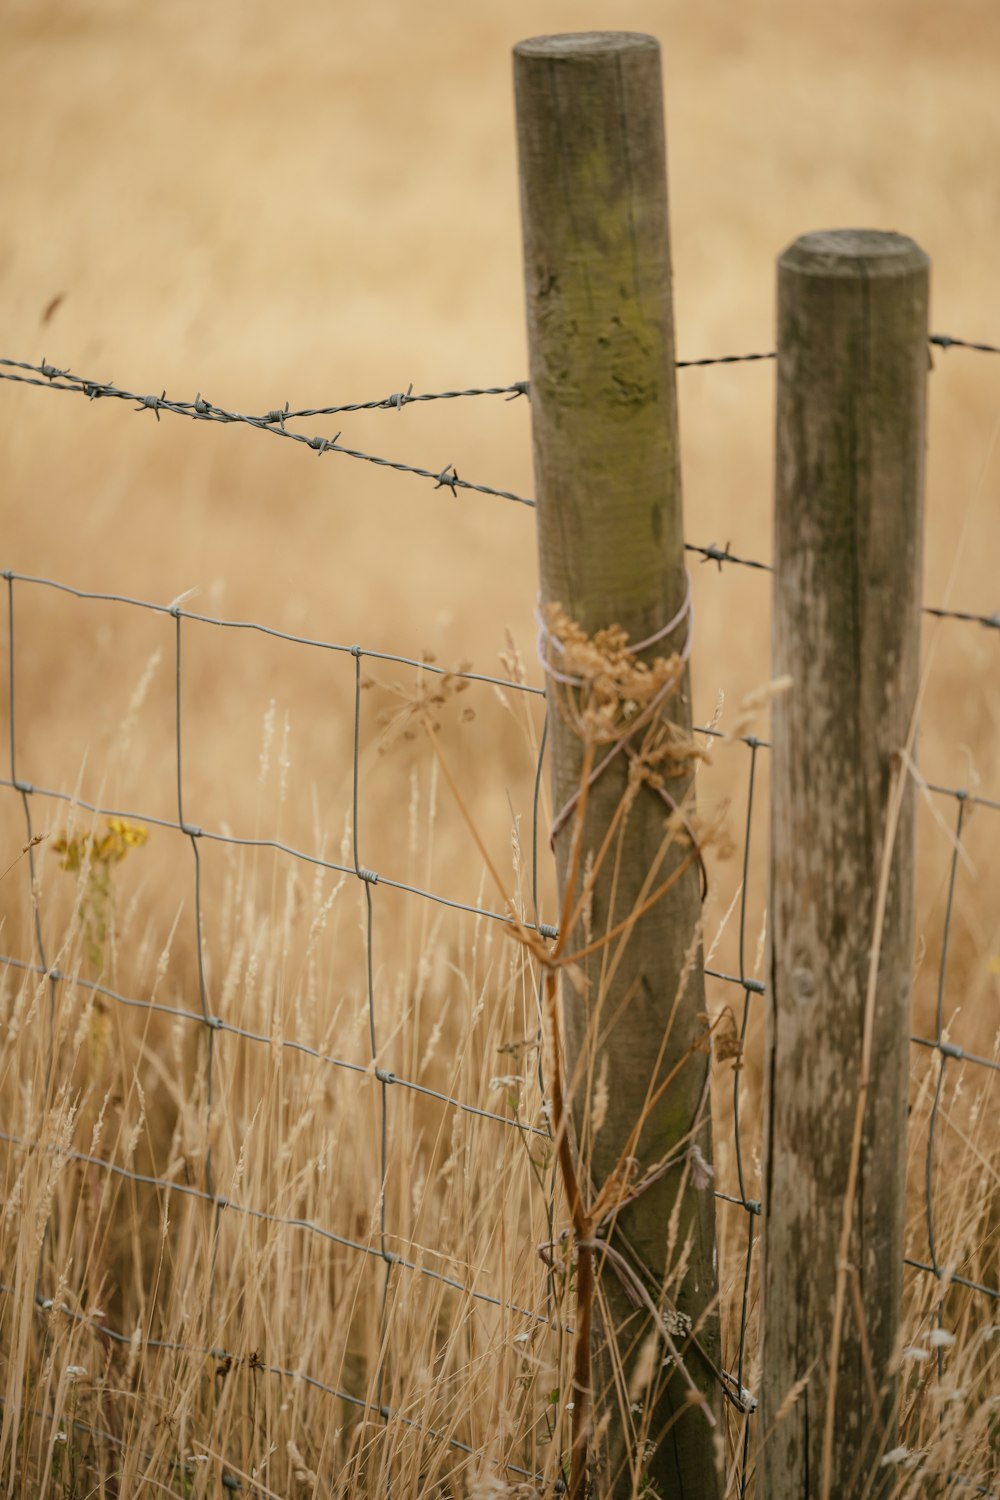 a wire fence with a bird on it